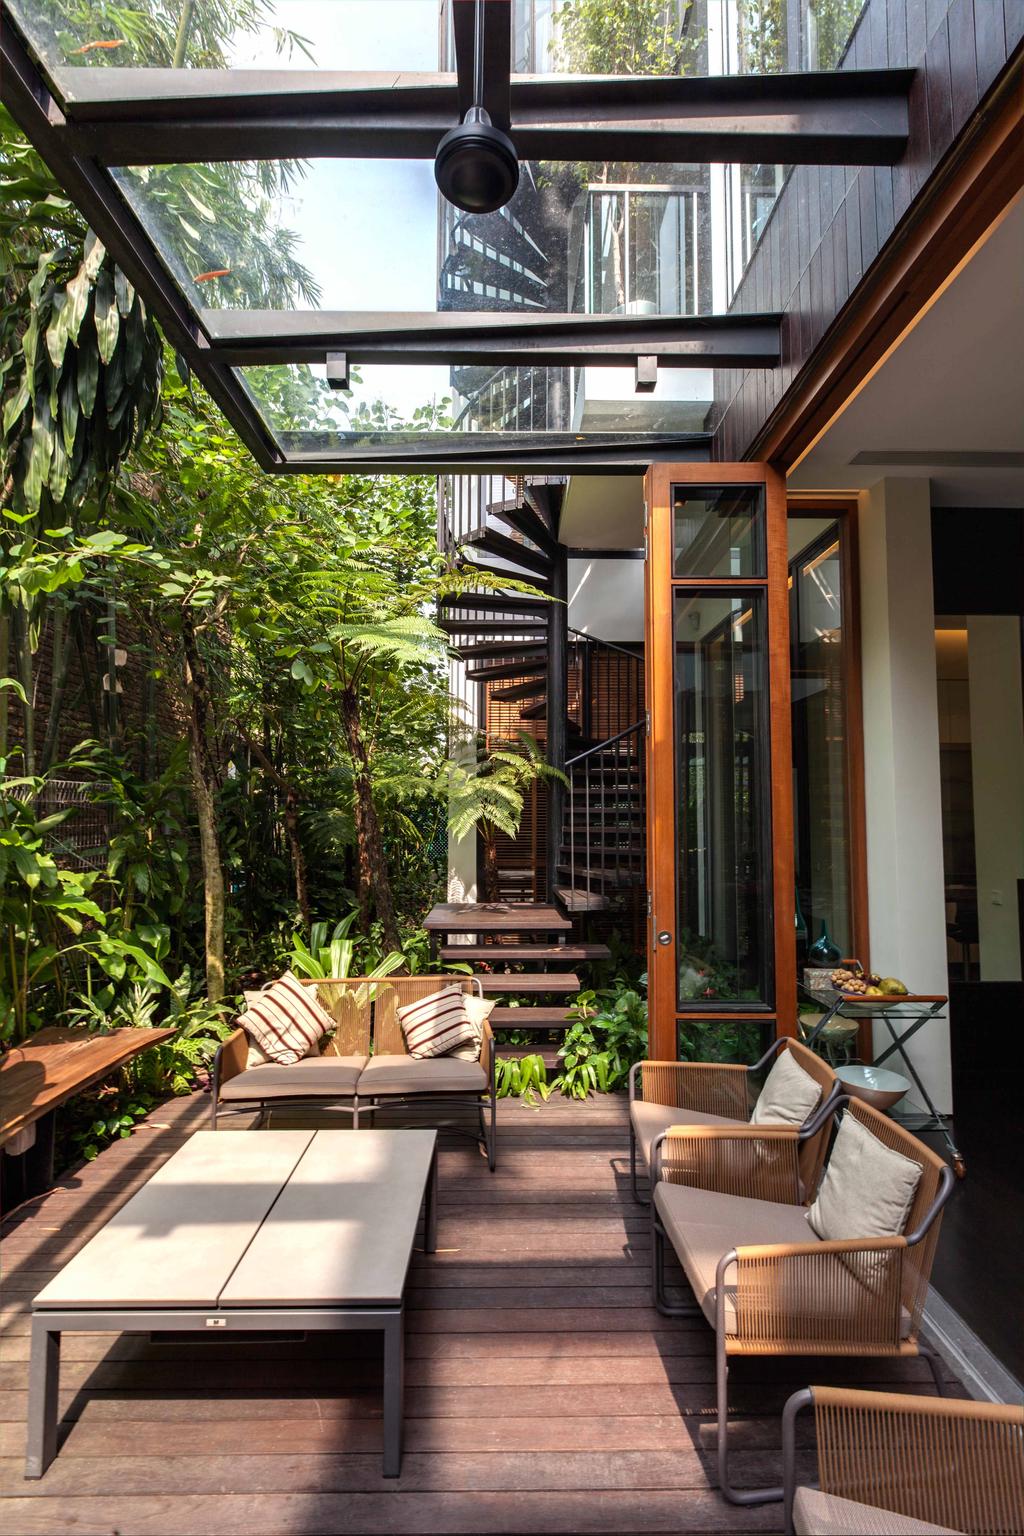 Contemporary, Landed, Merryn, Architect, Aamer Architects, Glass Shelter, Wood Theme, Plantation, Outdoor Seats, Tables And Chairs, Cushioned Chair, Cushions, Twisted Stairway, Molding, Flora, Forest, Land, Nature, Outdoors, Plant, Rainforest, Tree, Vegetation, Balcony, Appliance, Electrical Device, Oven